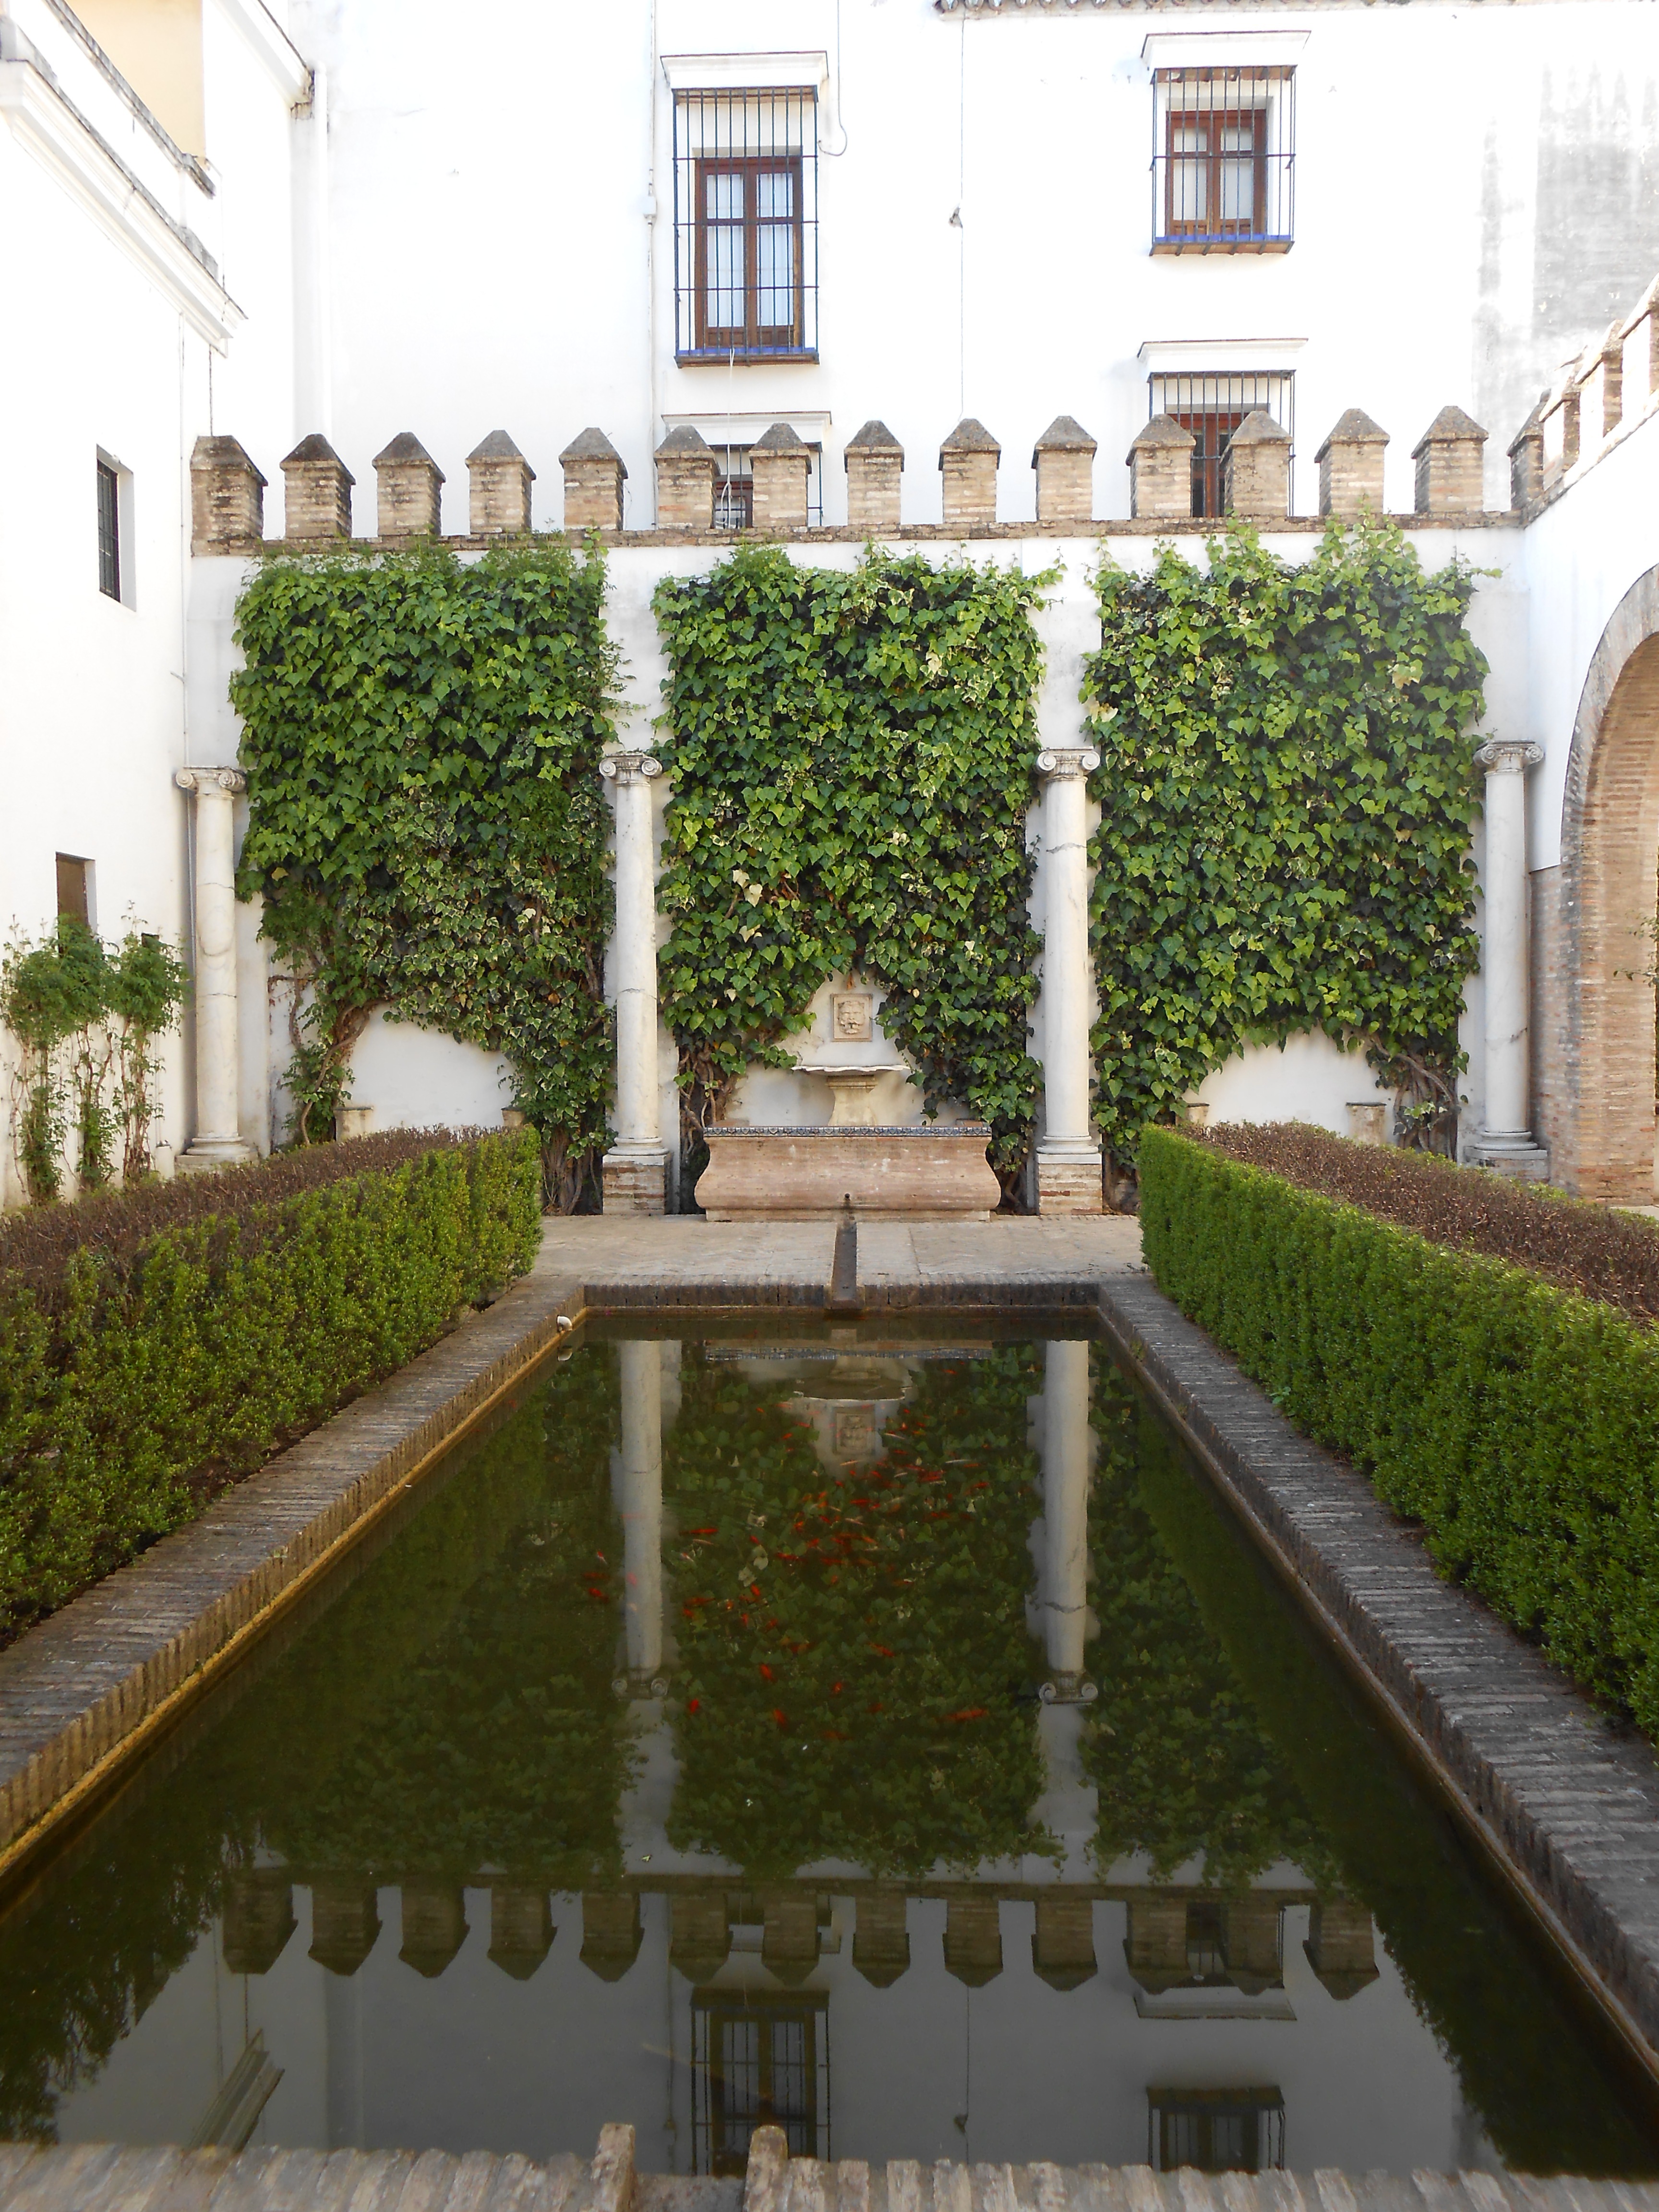 One of the many patios within the Real Alcazar. See the fishies in the reflection pool?